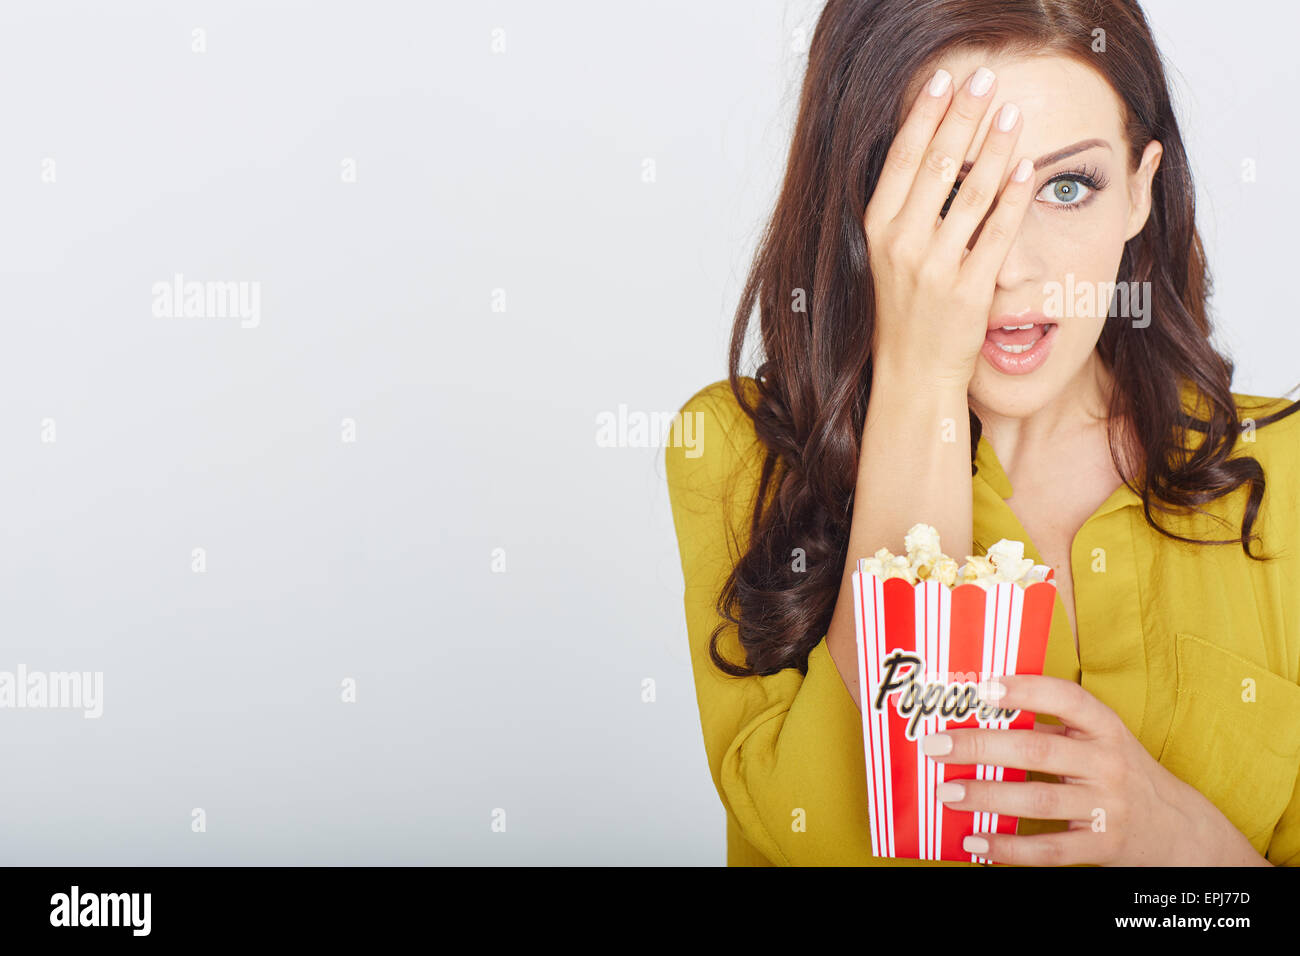 young woman with popcorn Stock Photo